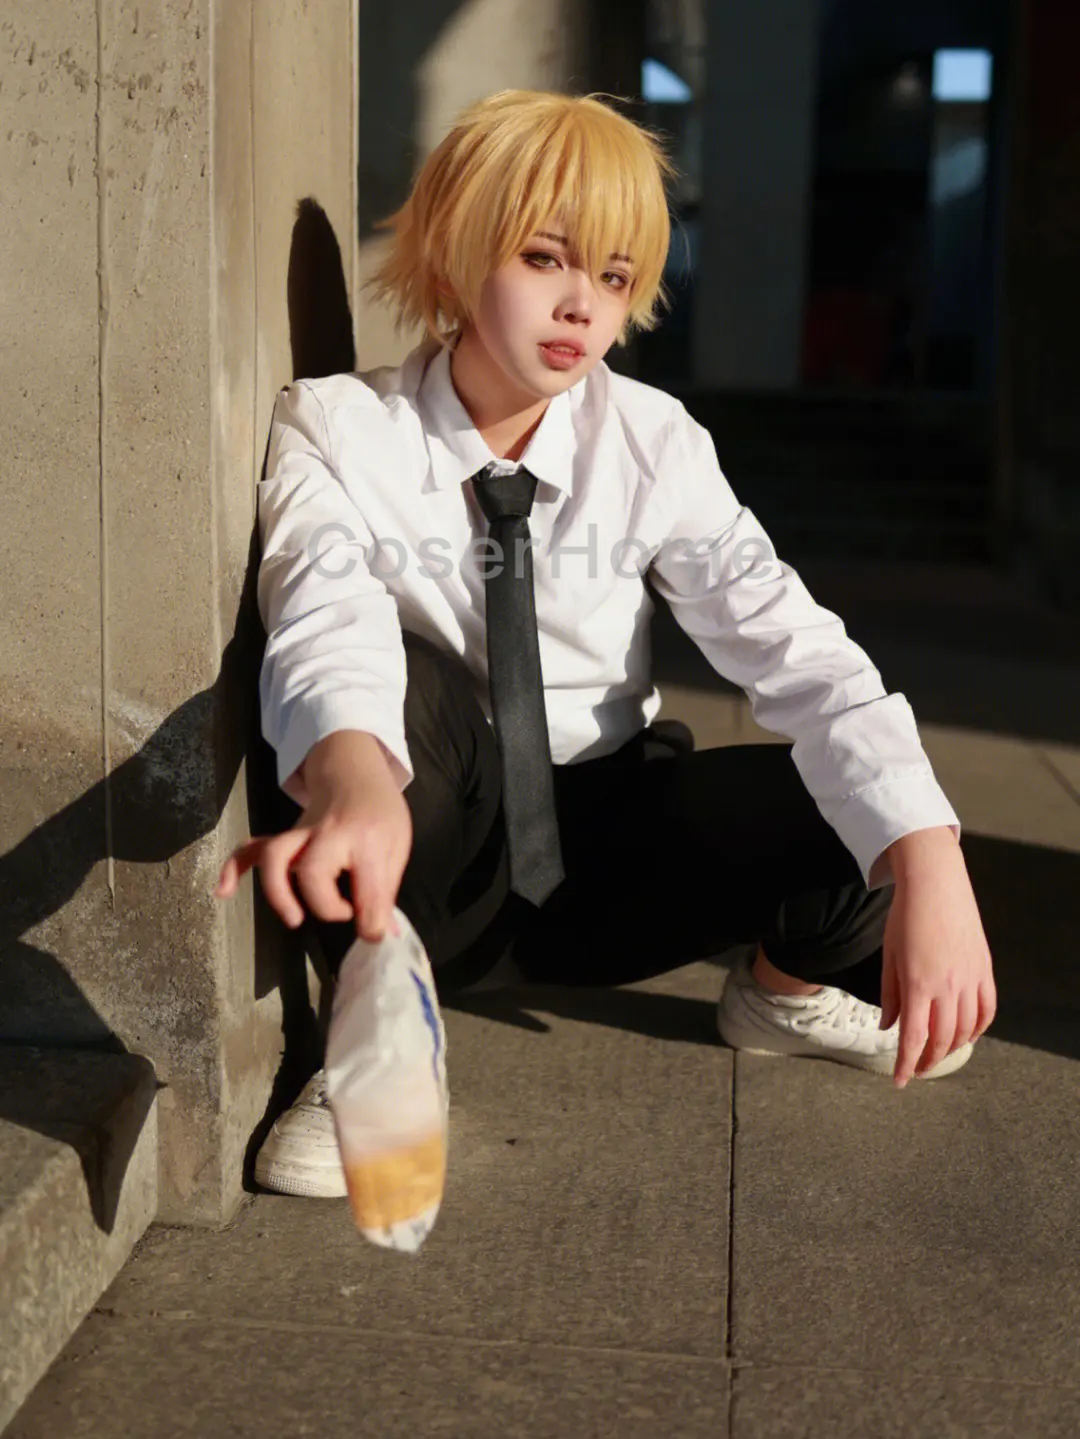 New 2023 Chainsaw Man Denji Wig Cosplay Golden Yellow Curly Hair Anime  Fluffy Wigs Halloween